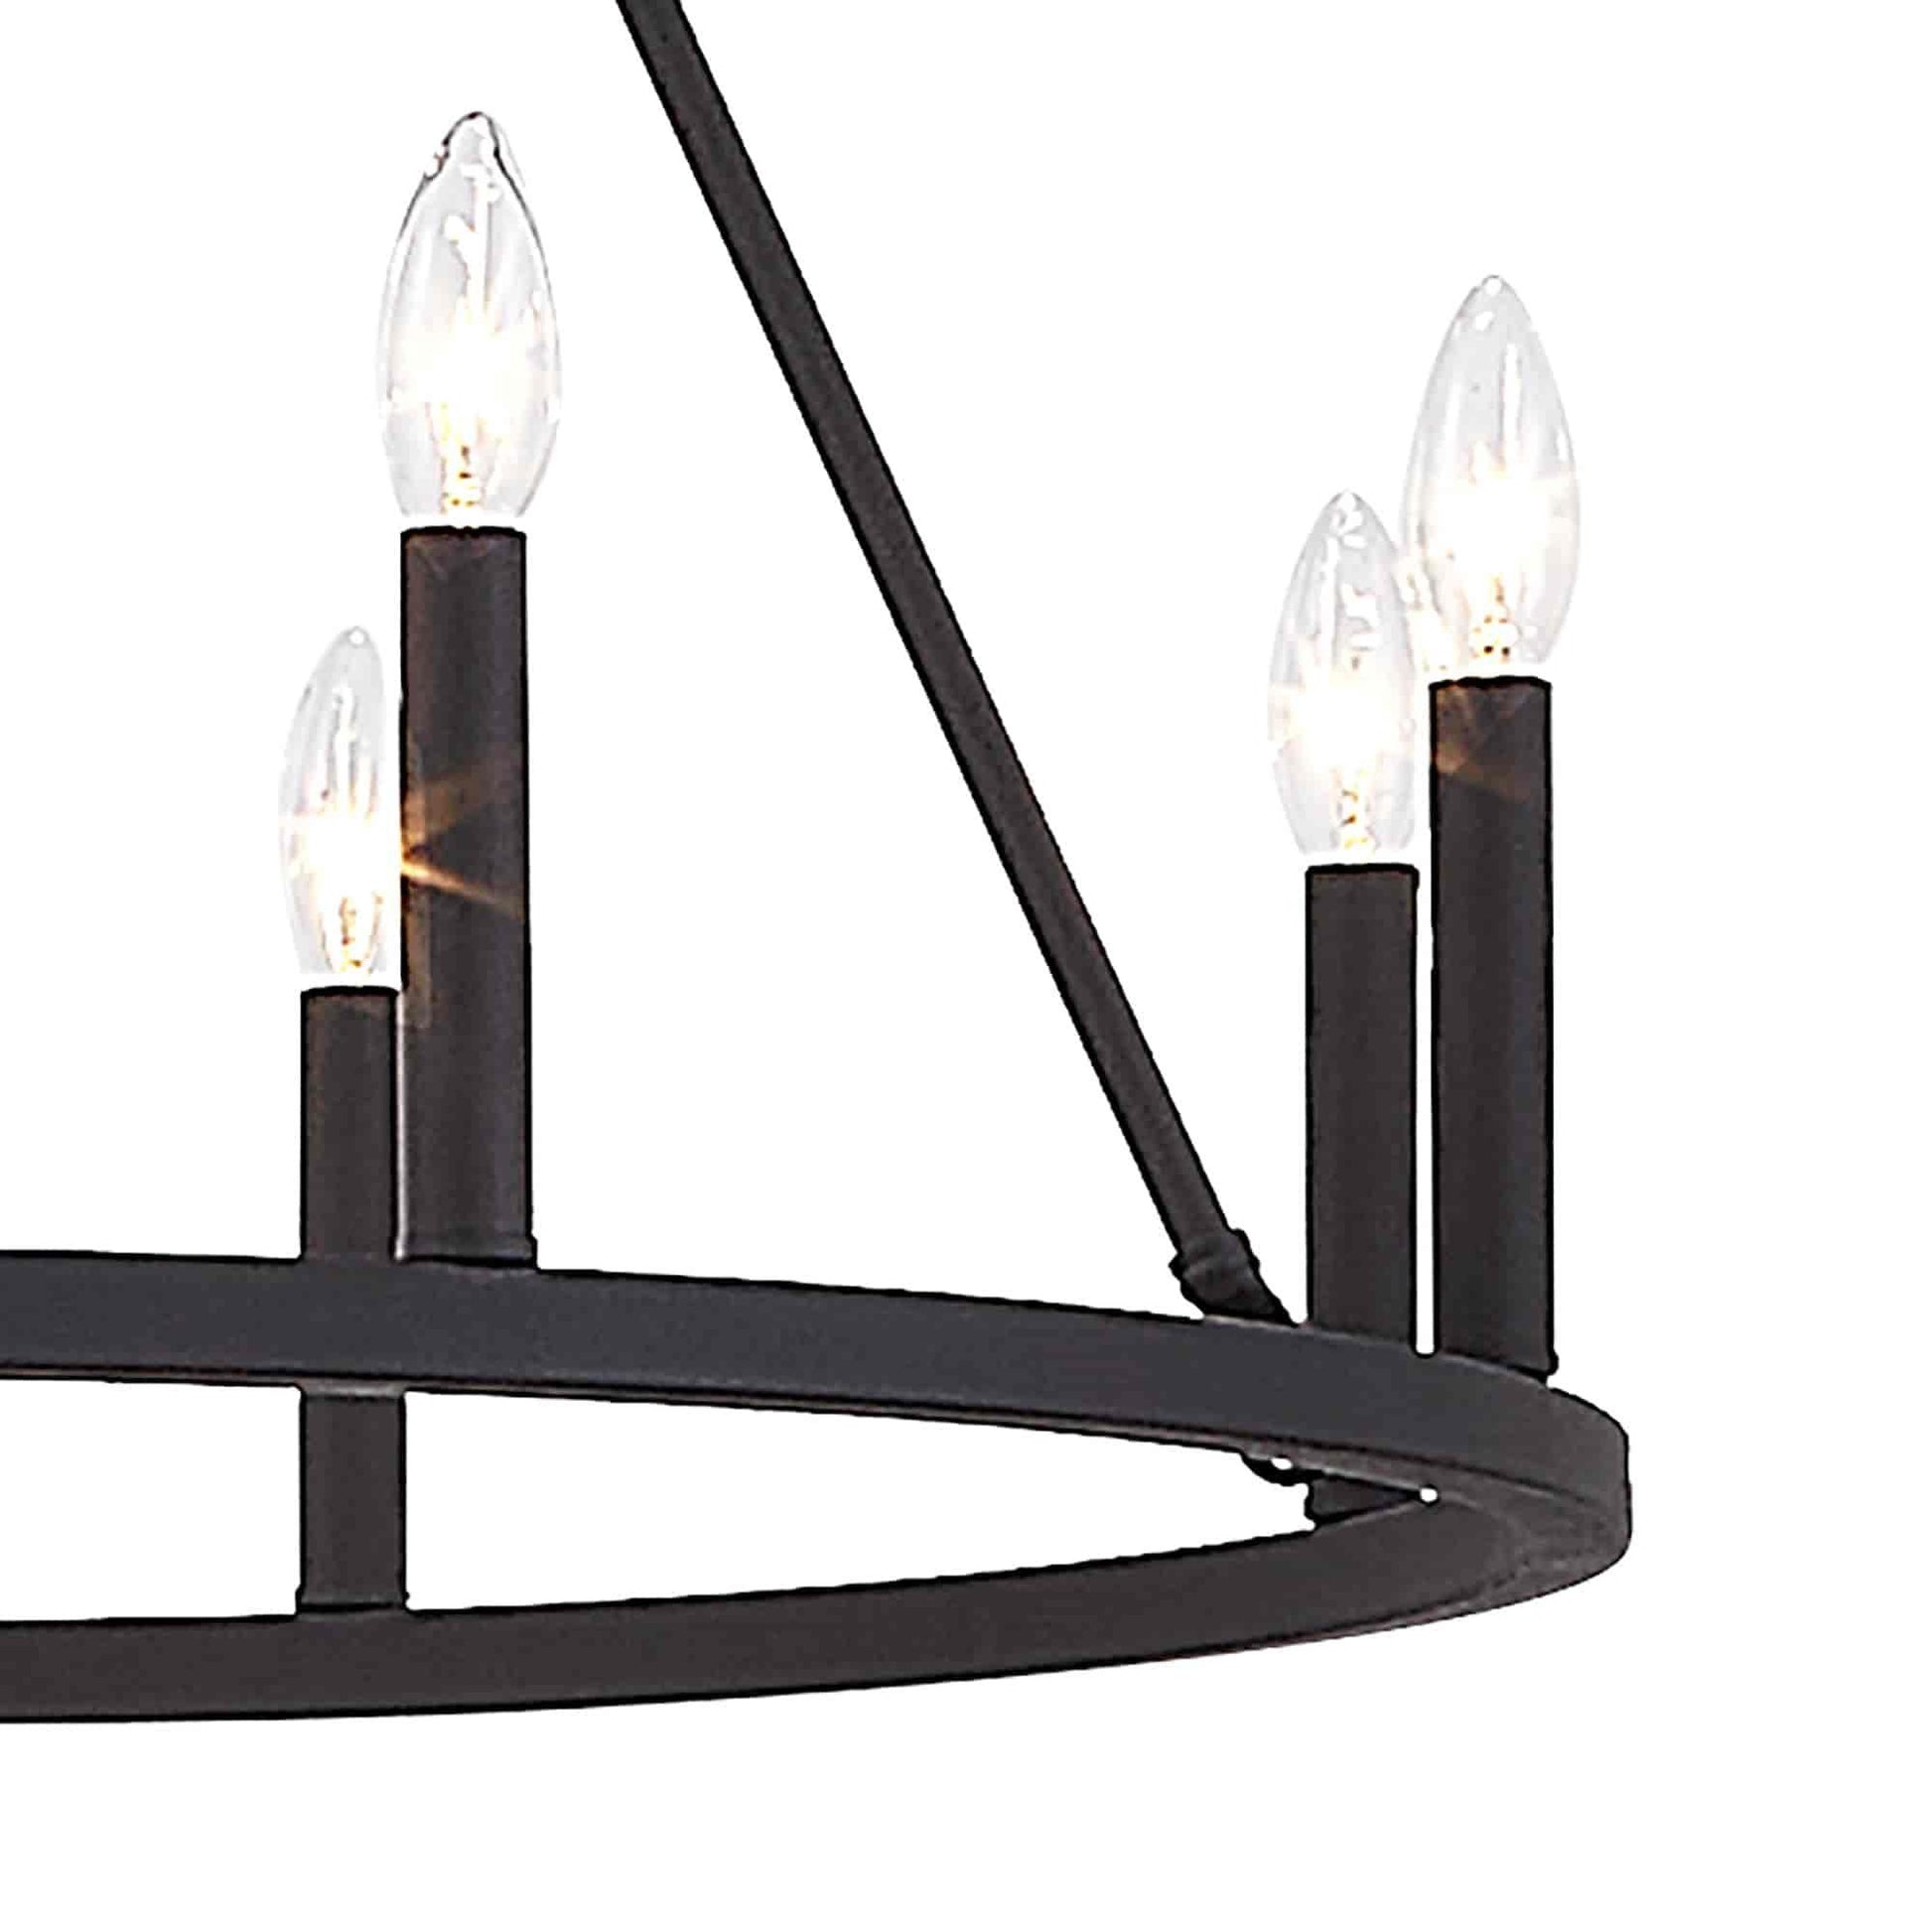 4512 | 12 - Light Candle Style Tiered Chandelier by ACROMA™  UL - ACROMA